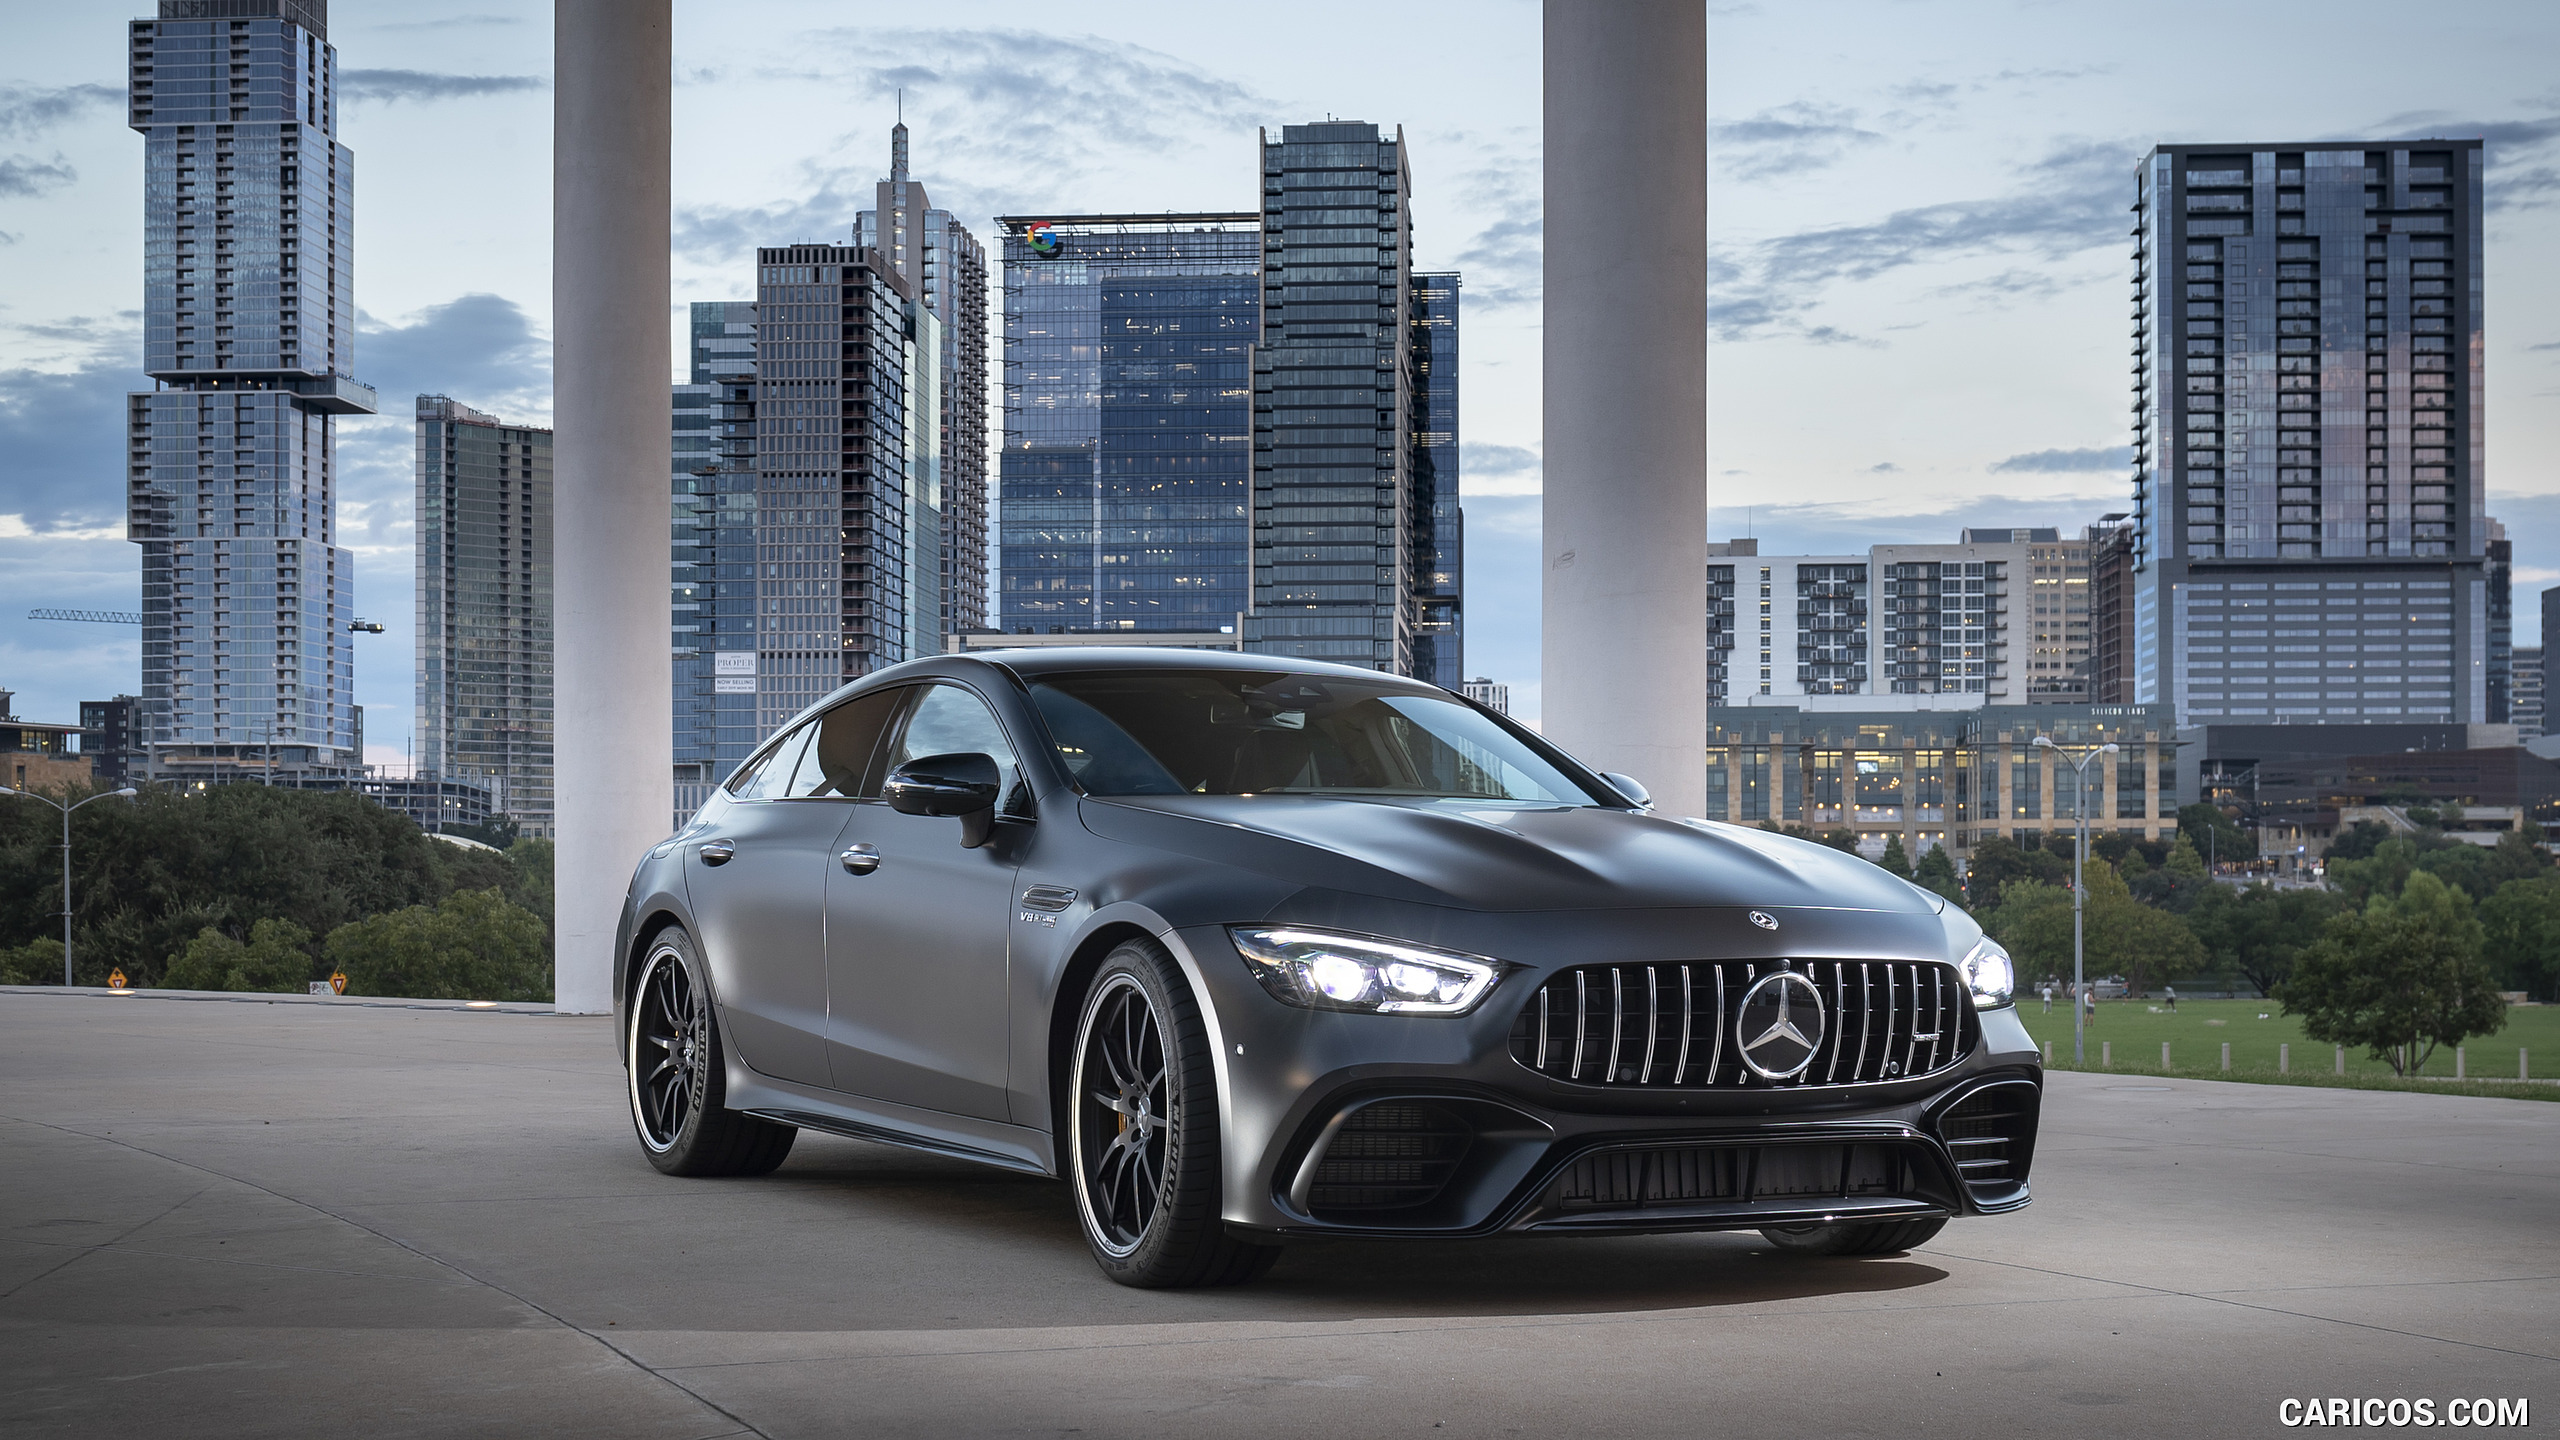 2019 Mercedes-AMG GT 63 S 4MATIC+ 4-Door Coupe - Front Three-Quarter, #213 of 427